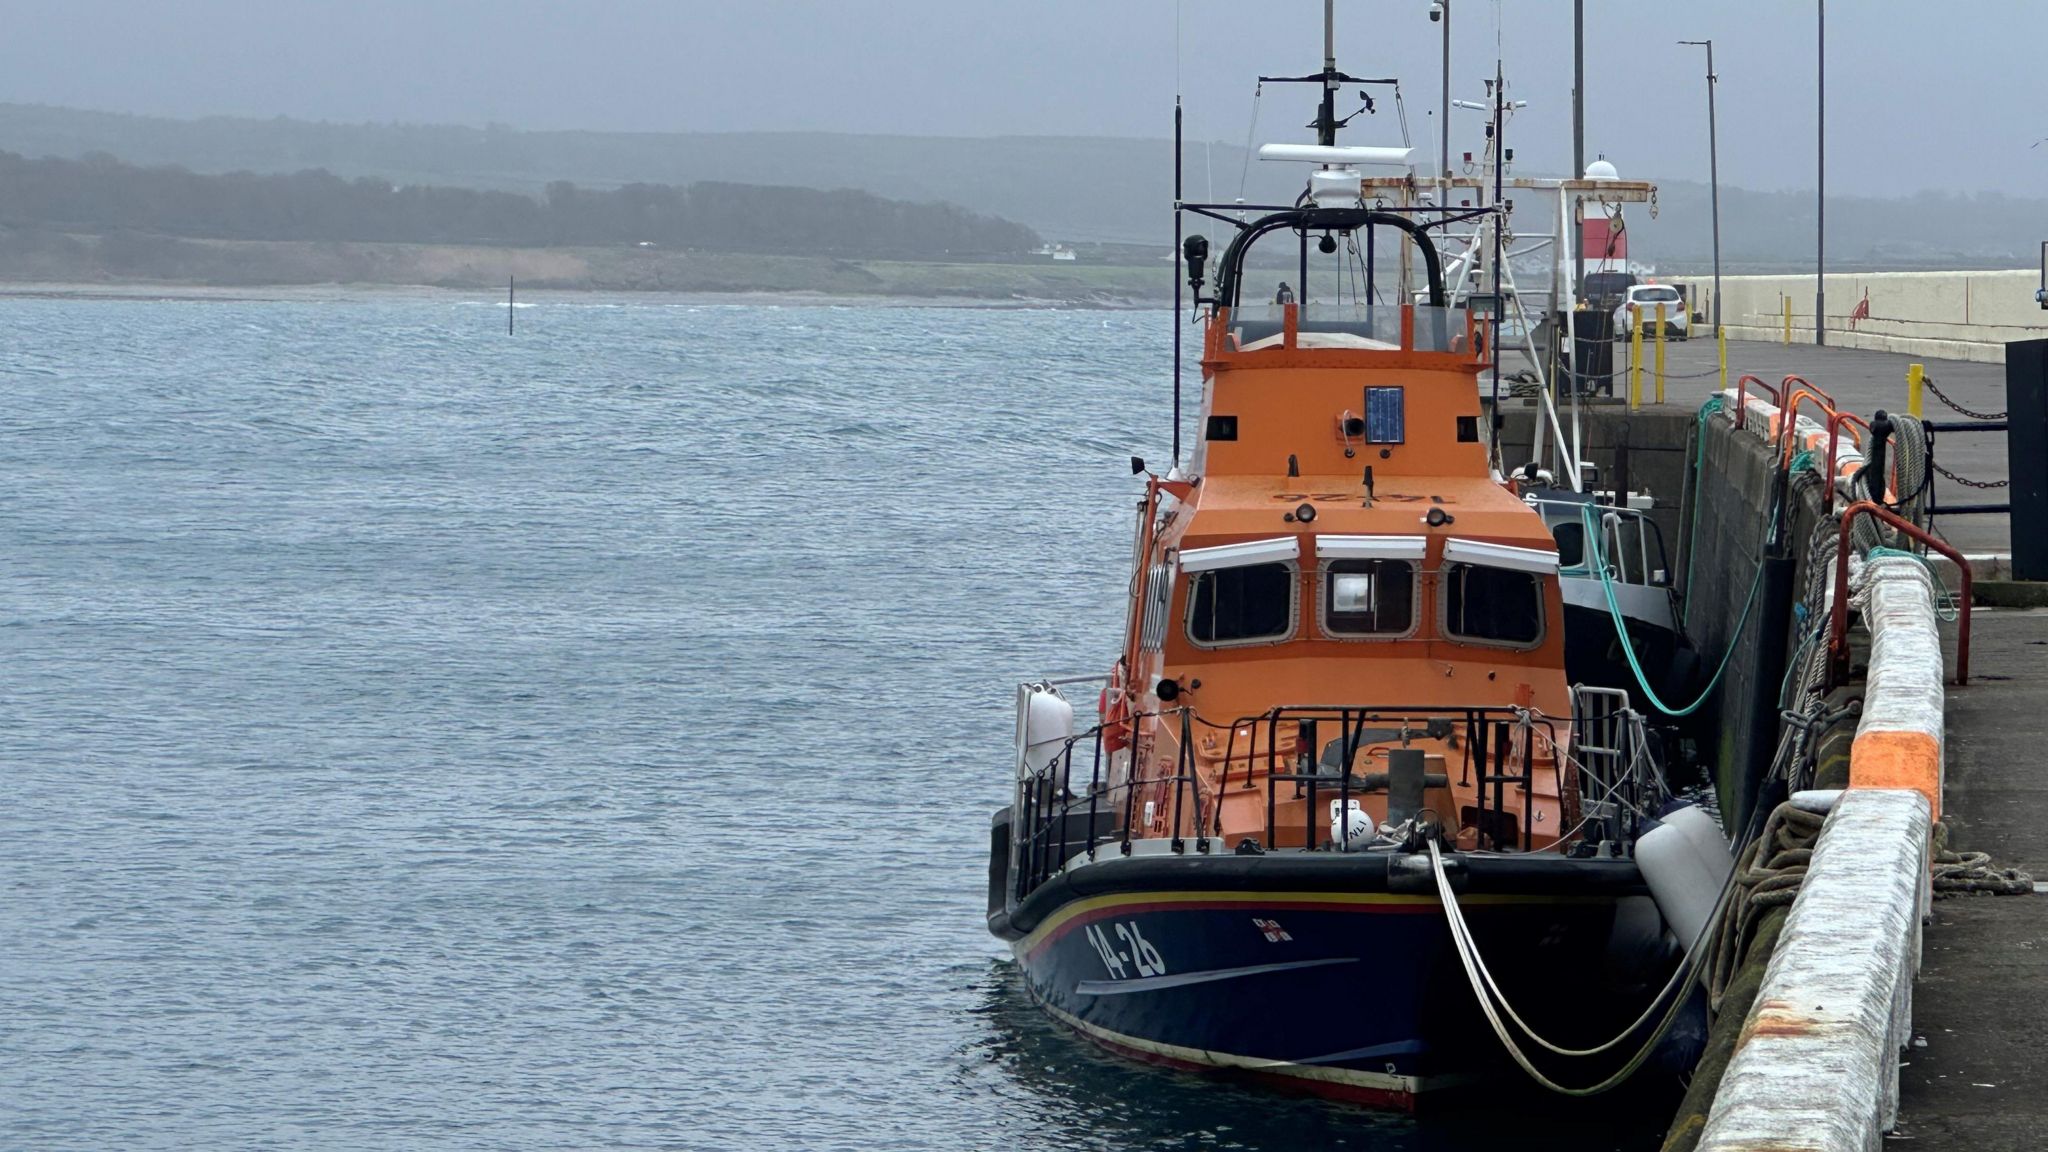 Port St Mary lifeboat